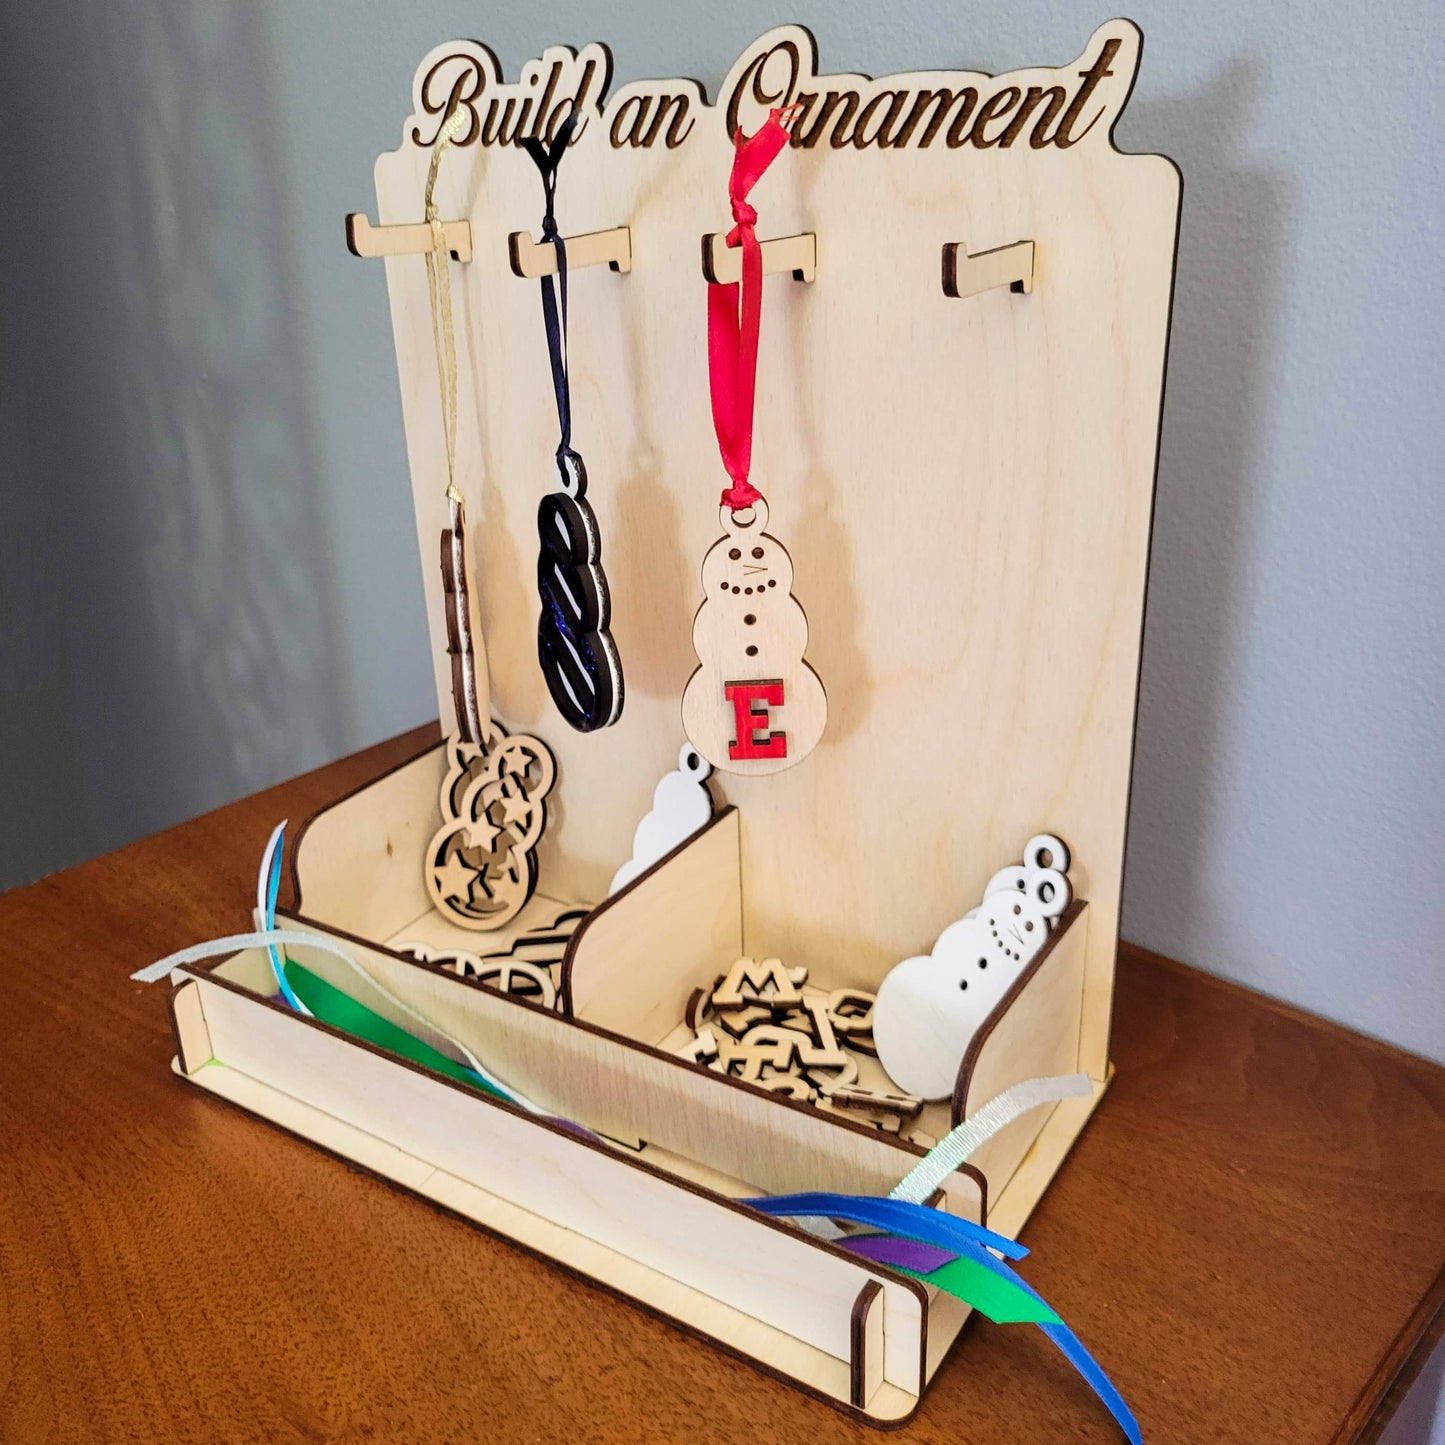 Build an Ornament Stand